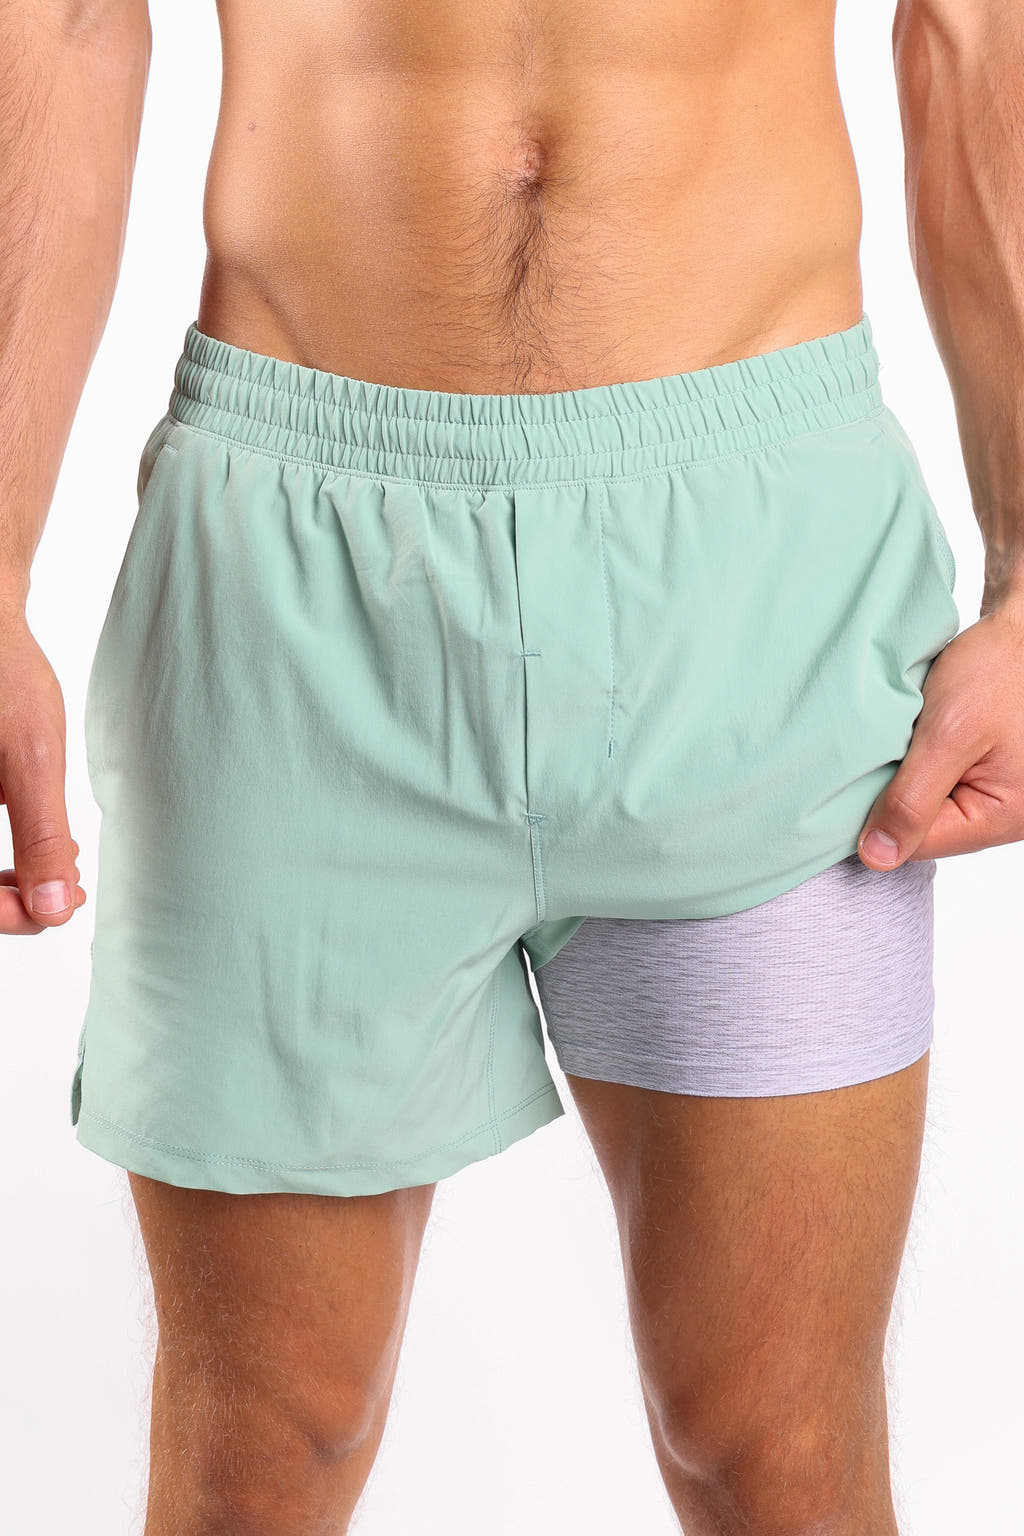 The Concrete Jungle | Sage Ball Hammock® 5 Inch Athletic Shorts